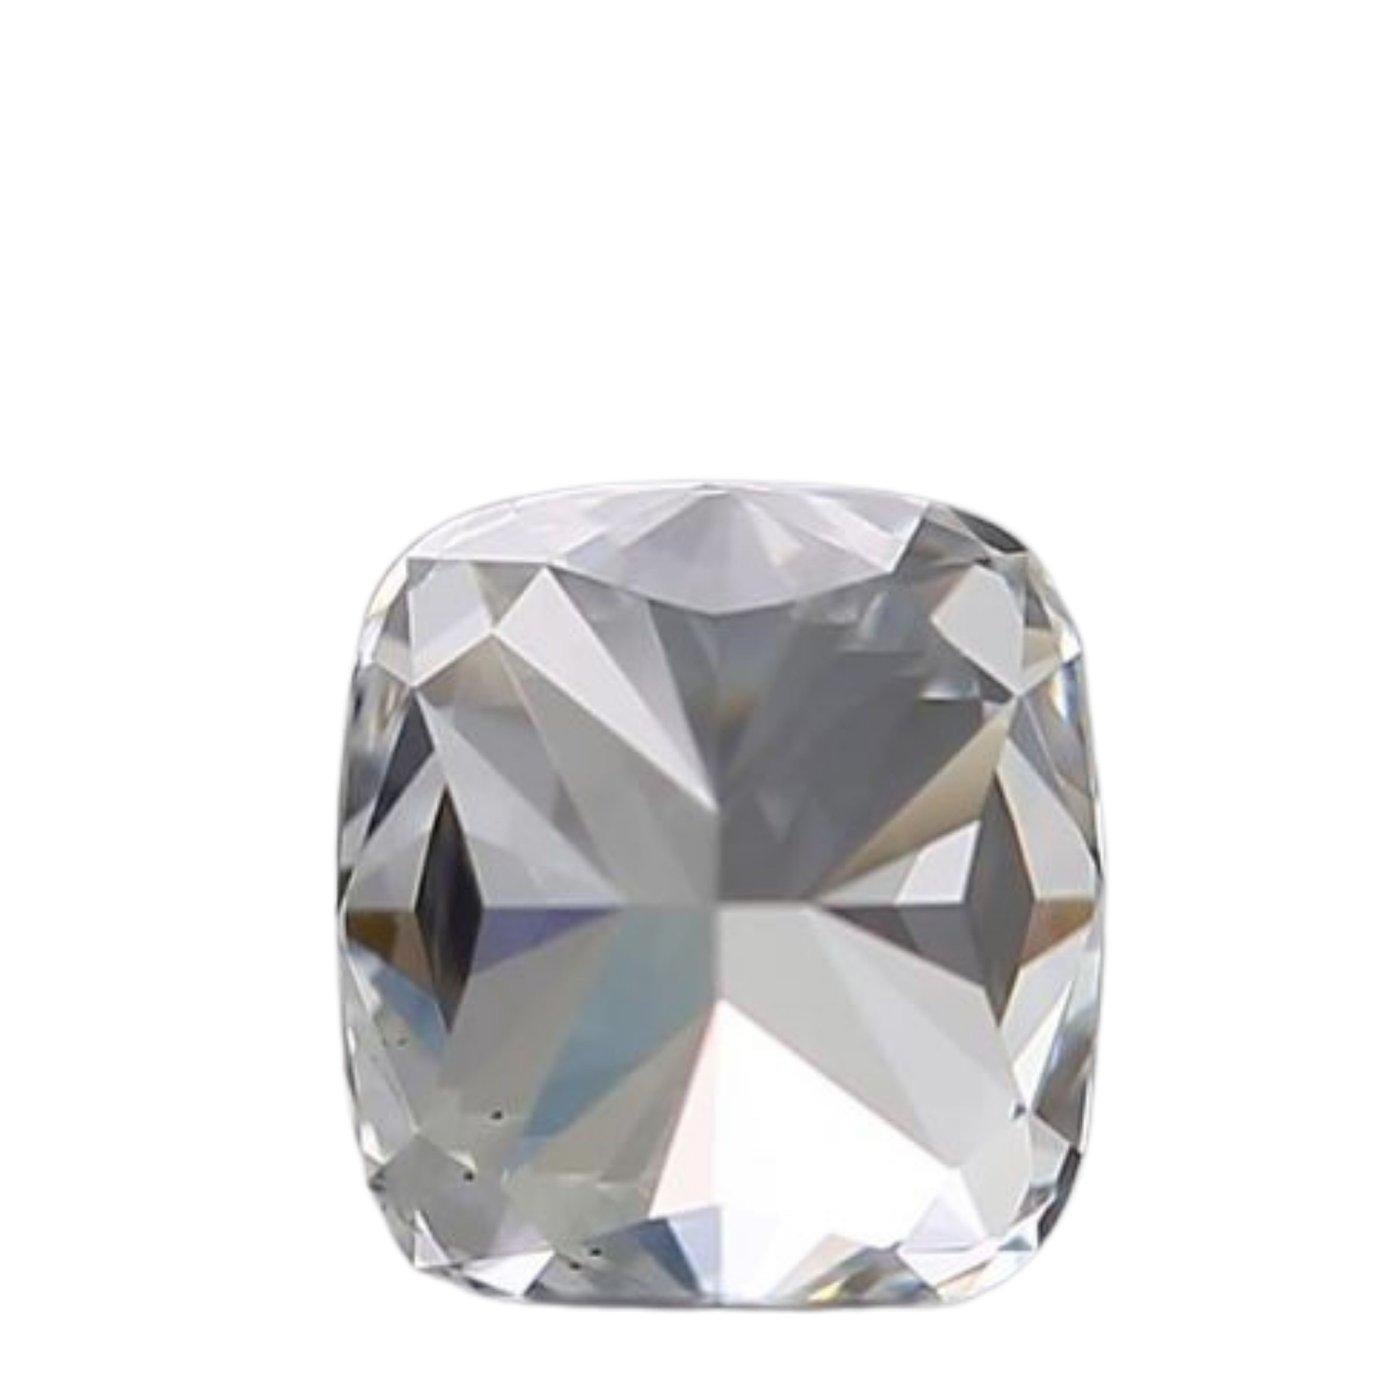 Women's or Men's Natural and Ideal Cut Cushion Diamond in a 0.42 carat E VS1, GIA Certificate For Sale